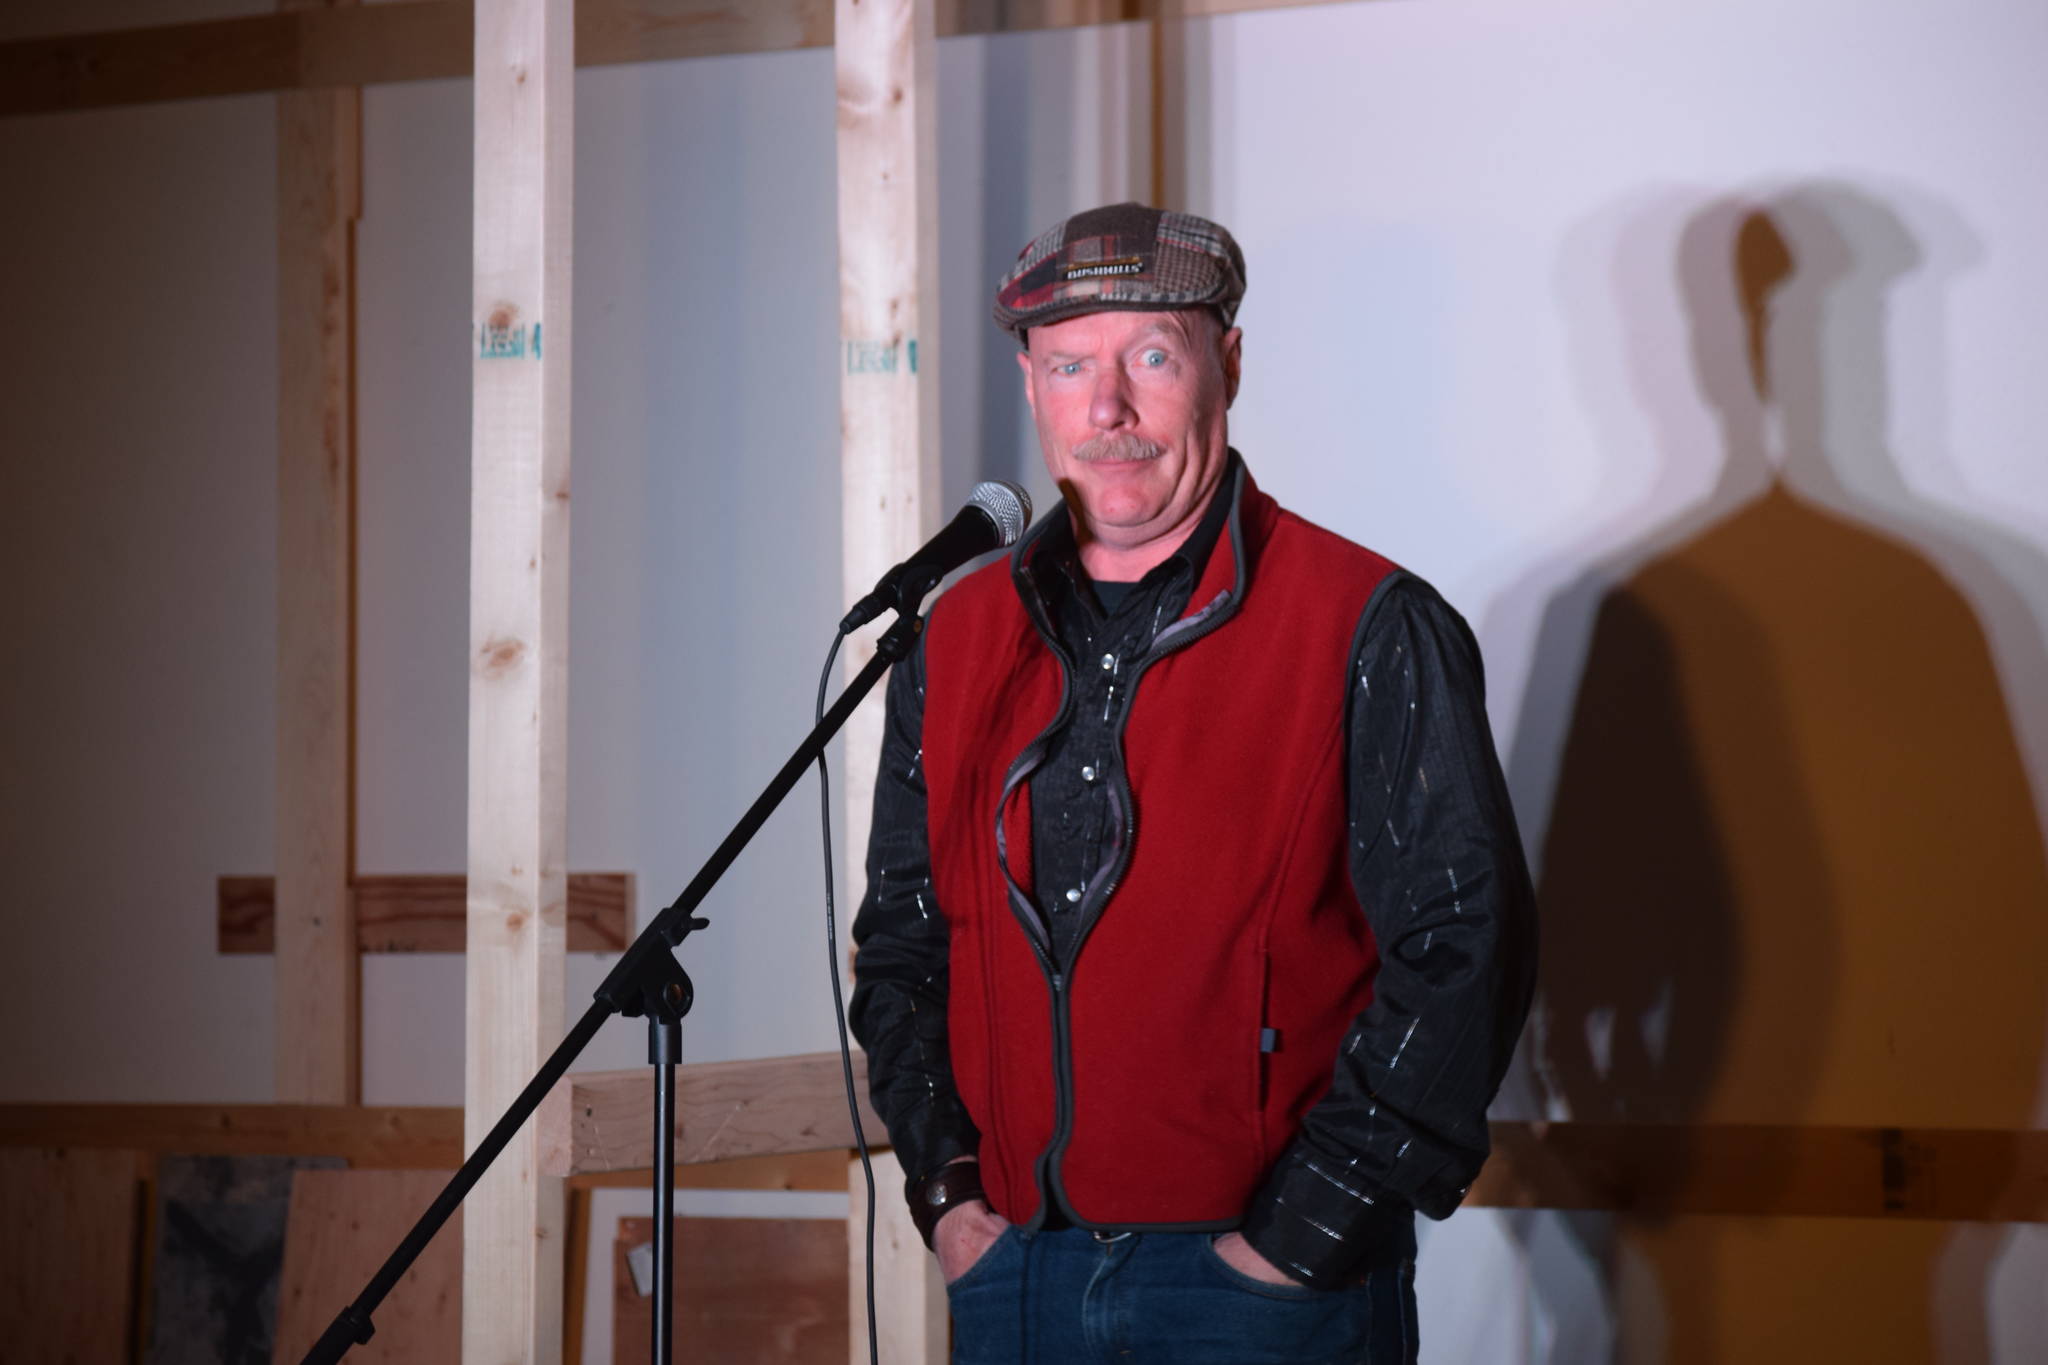 Kenai resident Paul Stevenson performs stand-up comedy for the first time at the Kenai Performers Theater on Thursday. (Photo by Brian Mazurek/Peninsula Clarion)